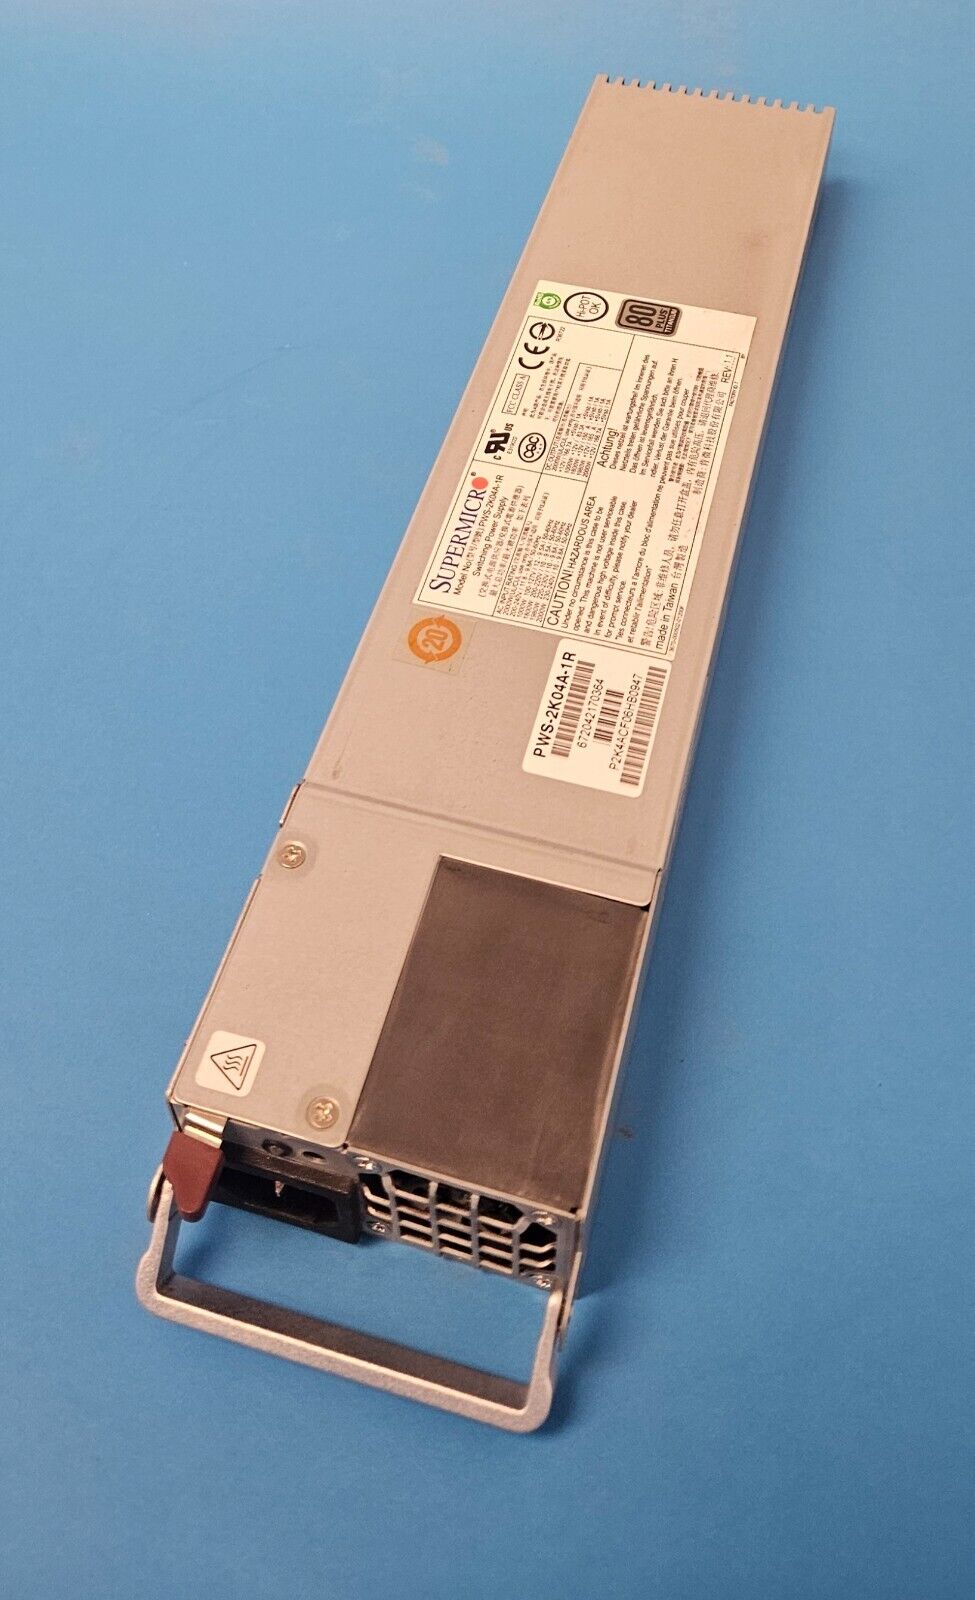 SUPERMICRO PWS-2K04A-1R 2000W SWITCHING POWER SUPPLY tested